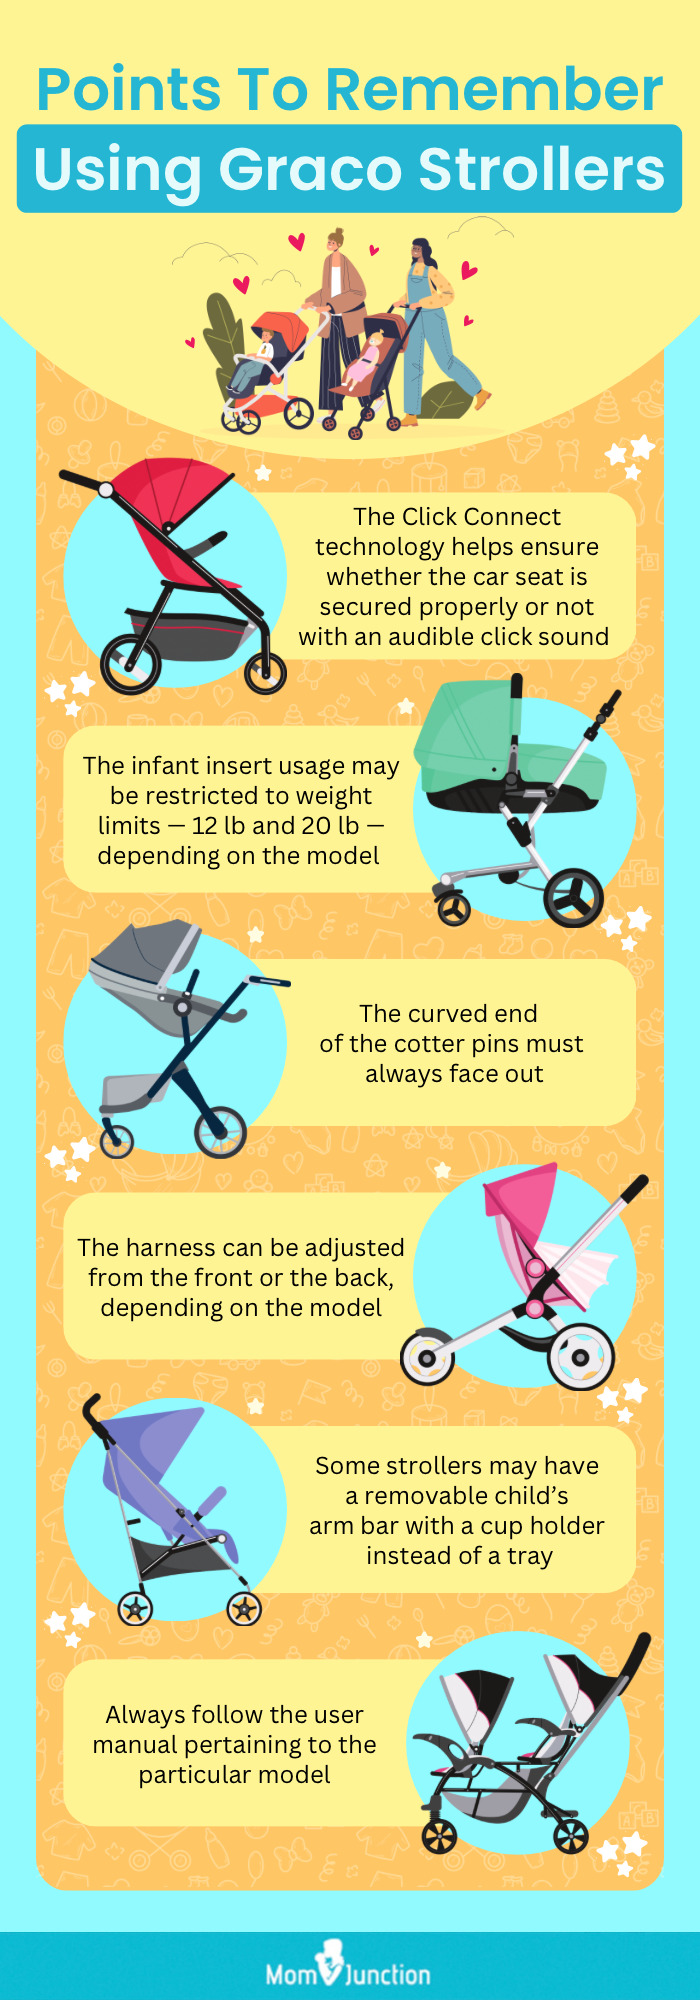 Points To Remember Using Graco Strollers